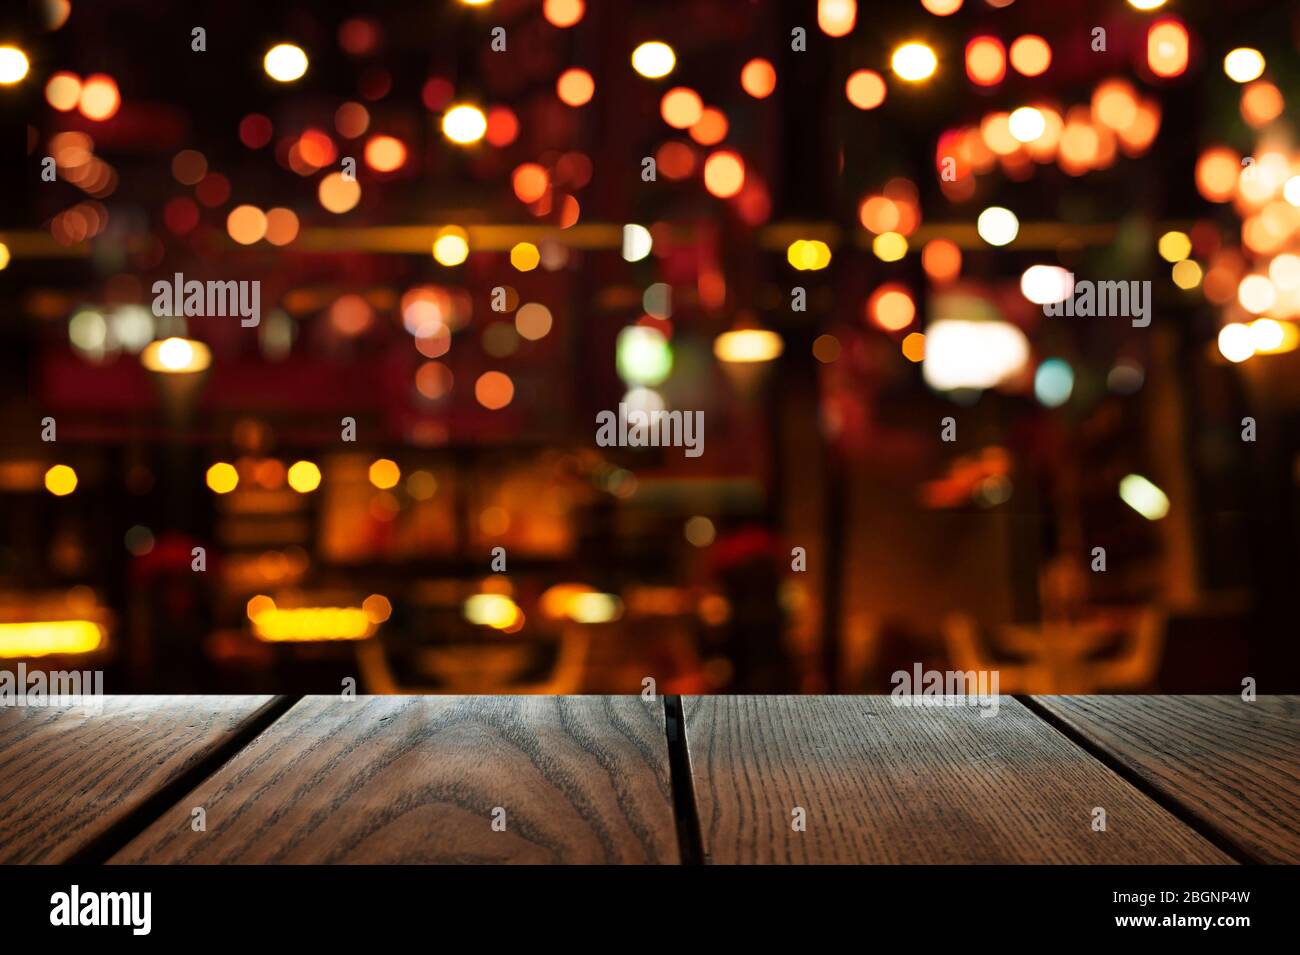 blur bokeh of bar or club party dark night light background with wood table background Stock Photo